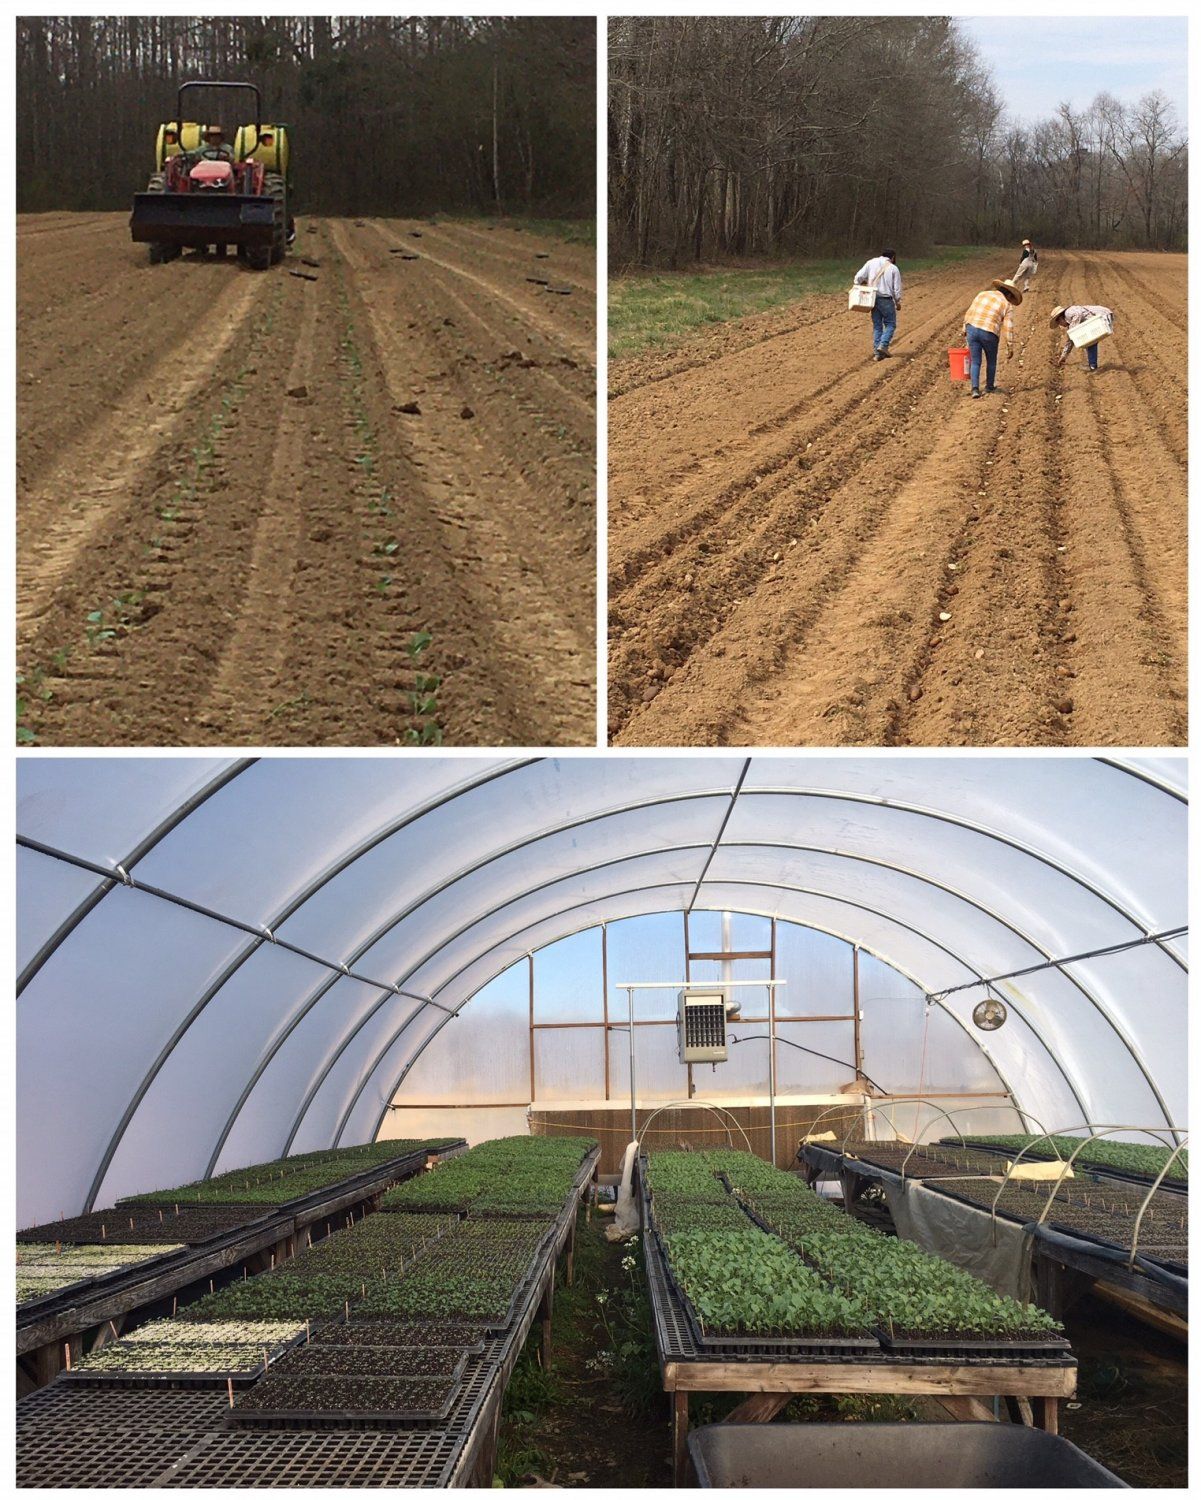 Farm Happenings for March 23rd, 2021